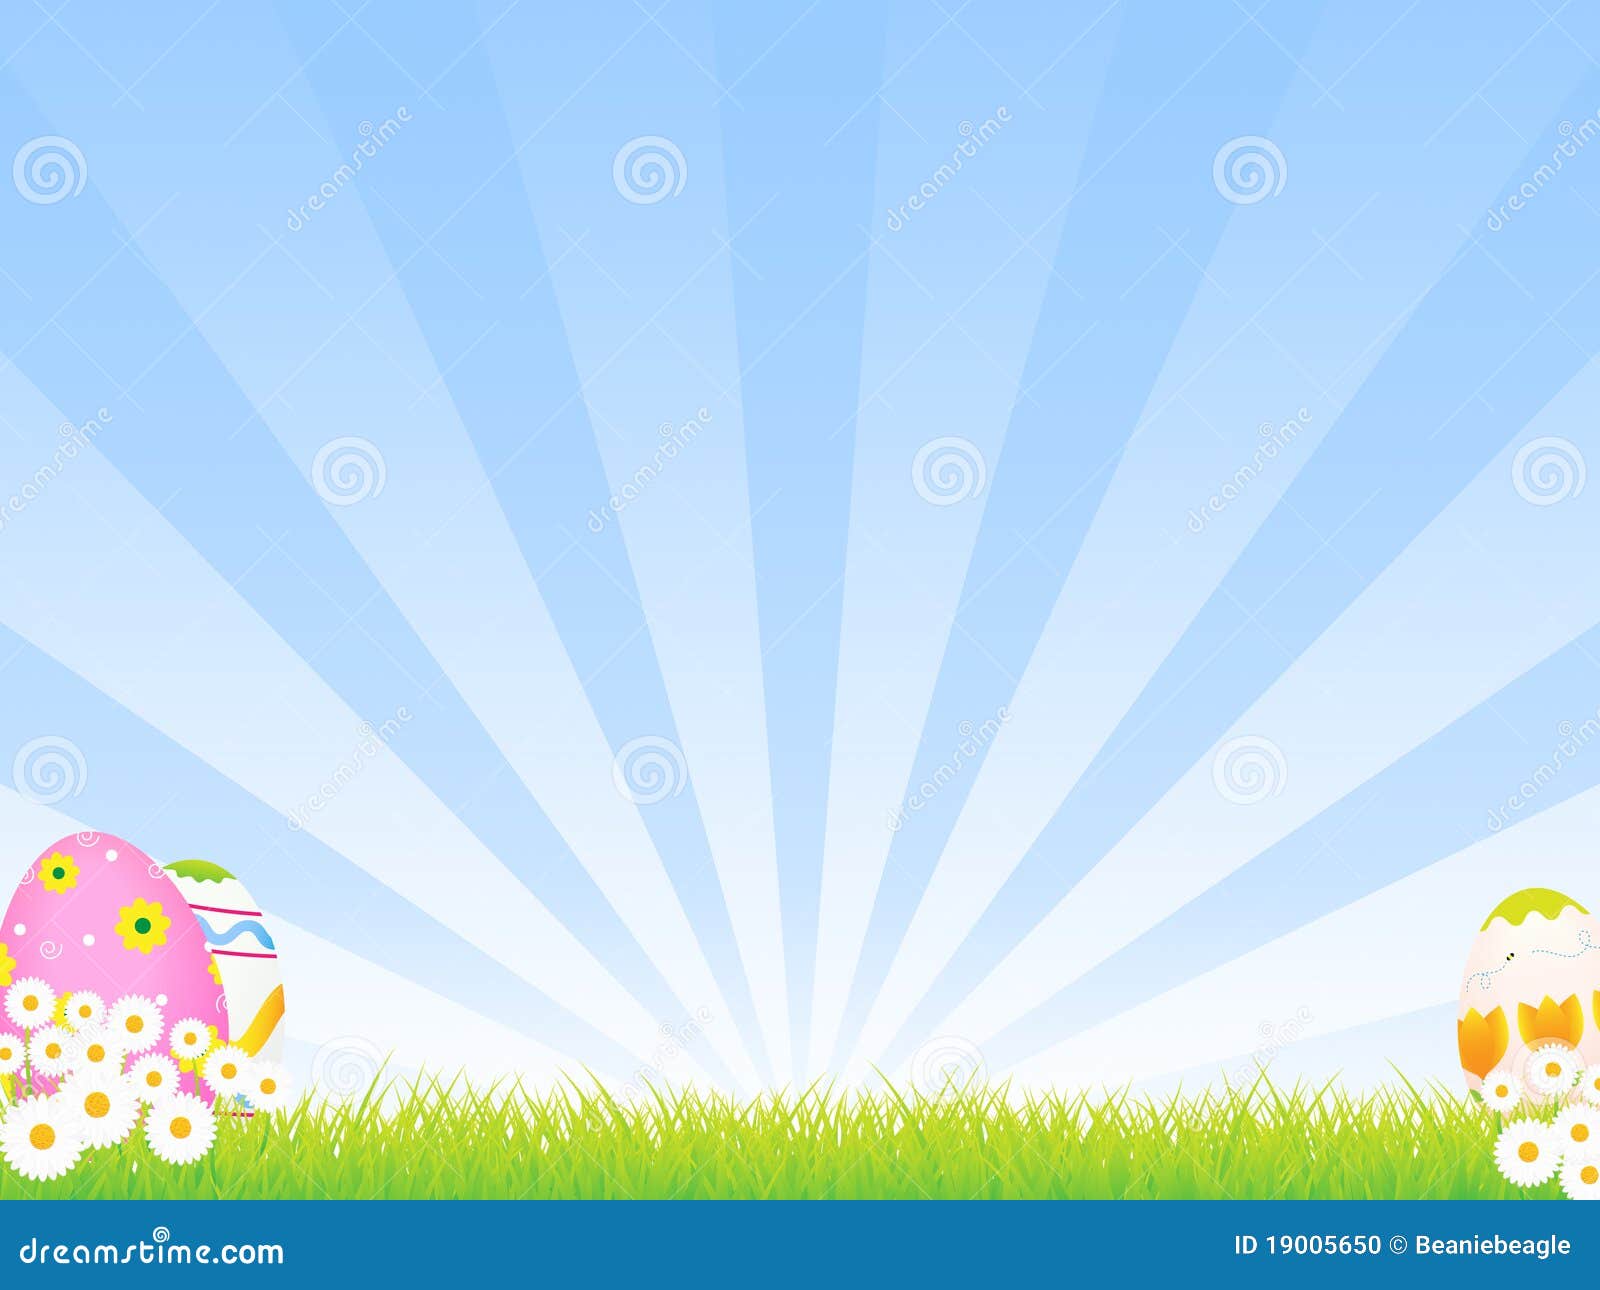 easter backgrounds clipart - photo #22